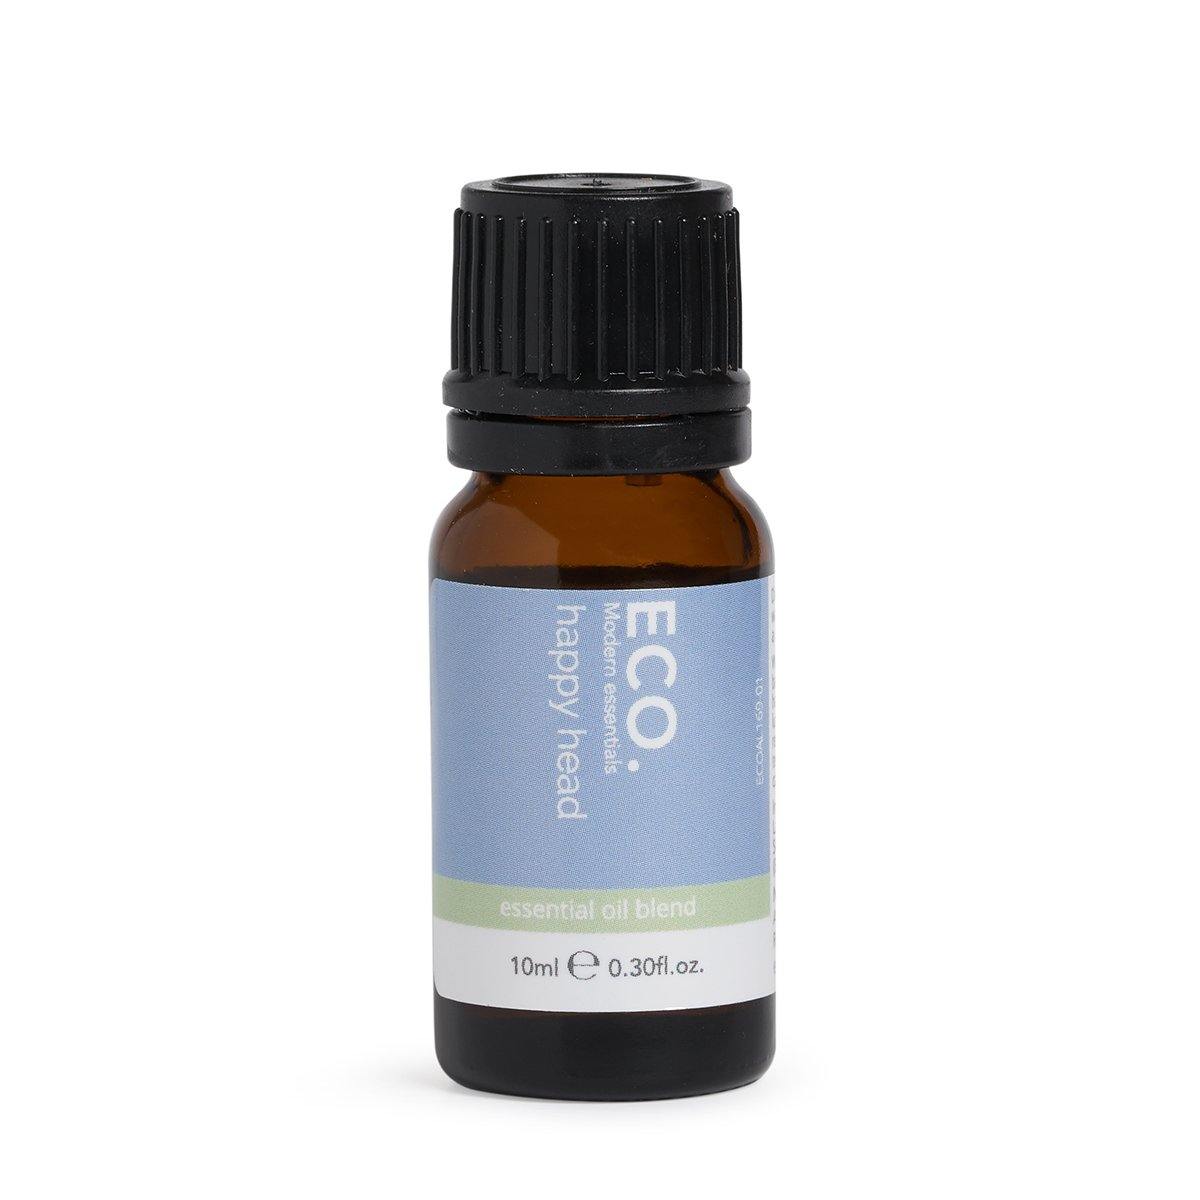 Whole Store ECO. Modern Essentials - Happy Head Essential Oil Blend